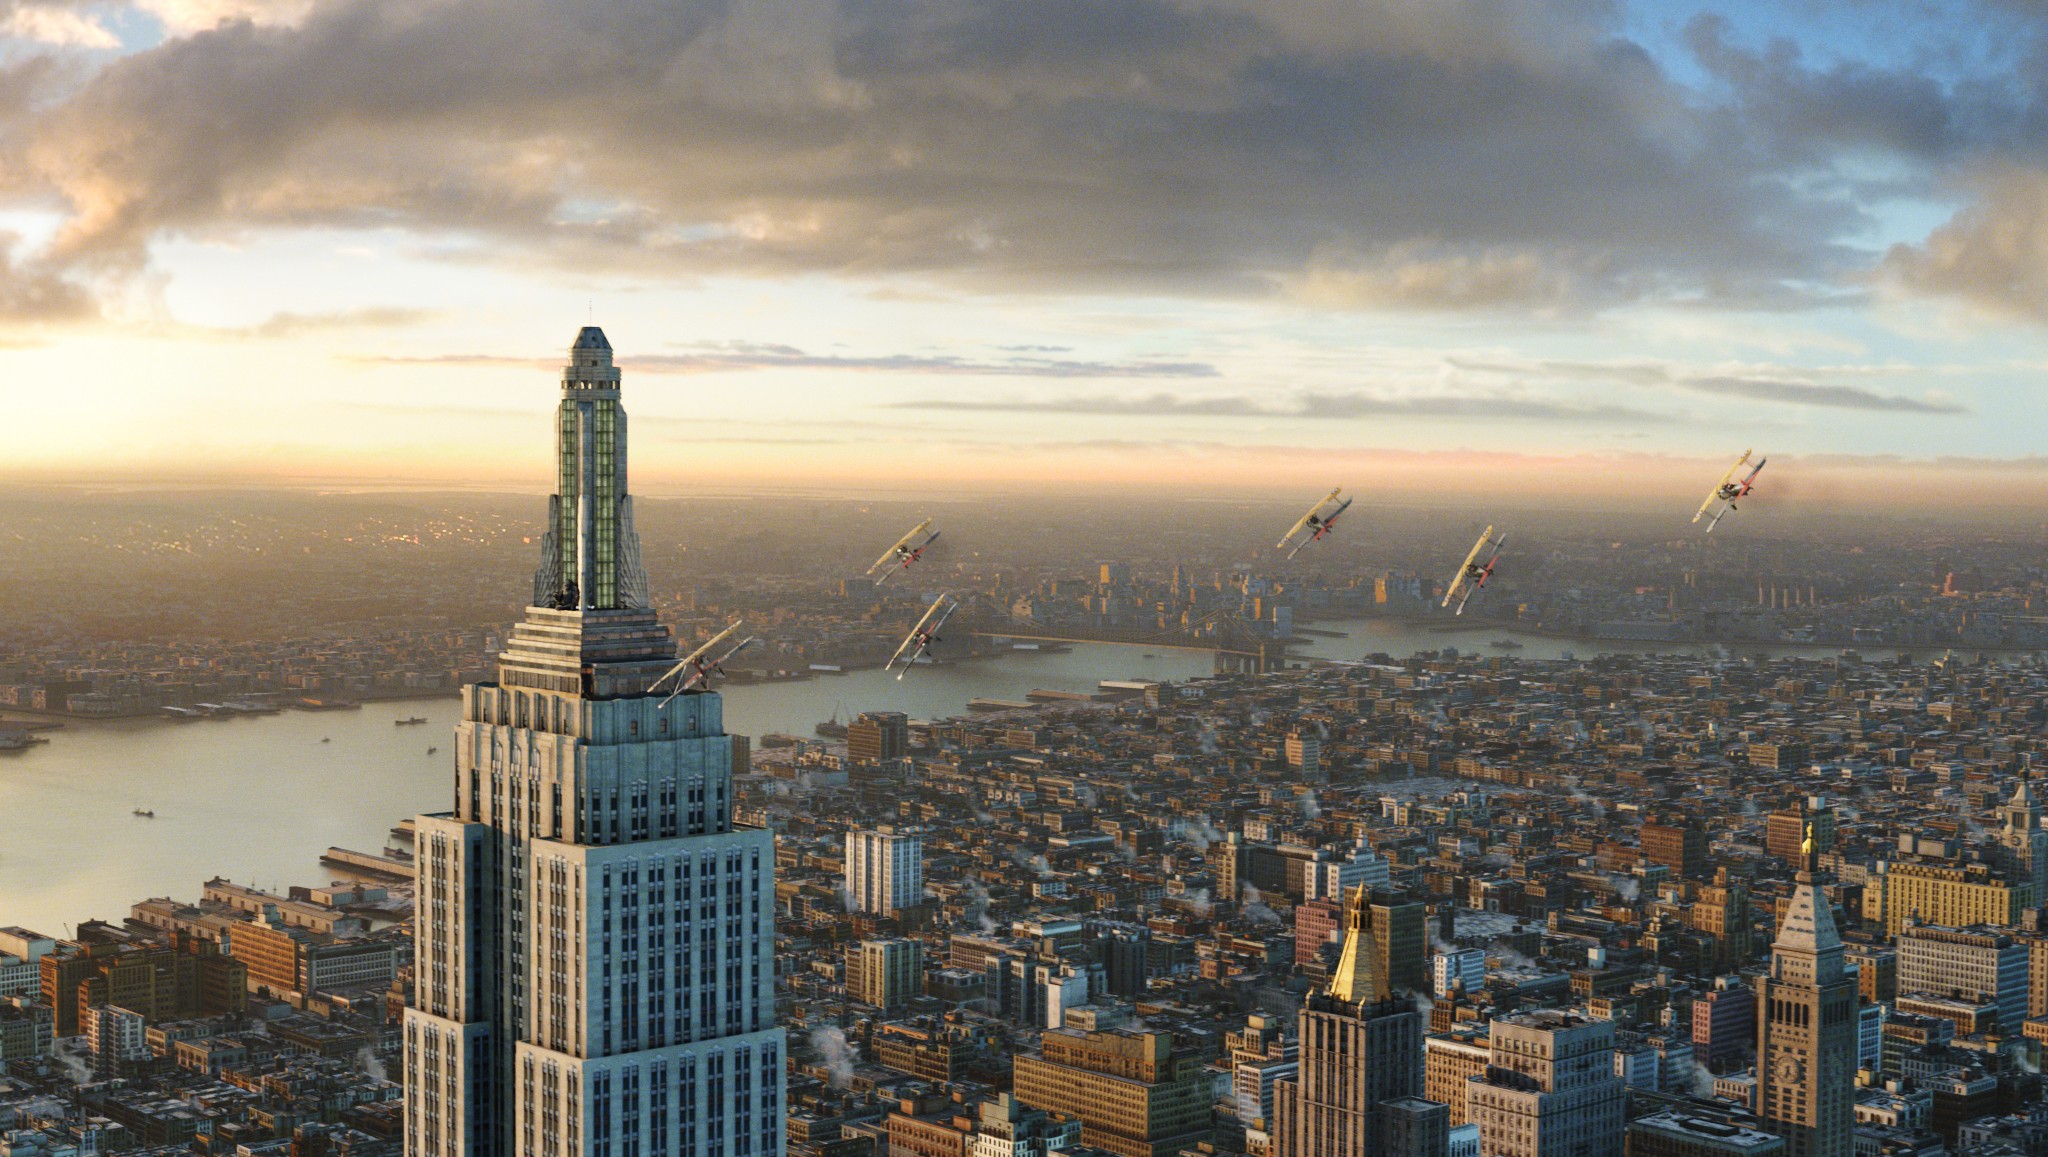 City Building King Kong Movies Cityscape 2005 Year Empire State Building Sky 2048x1157